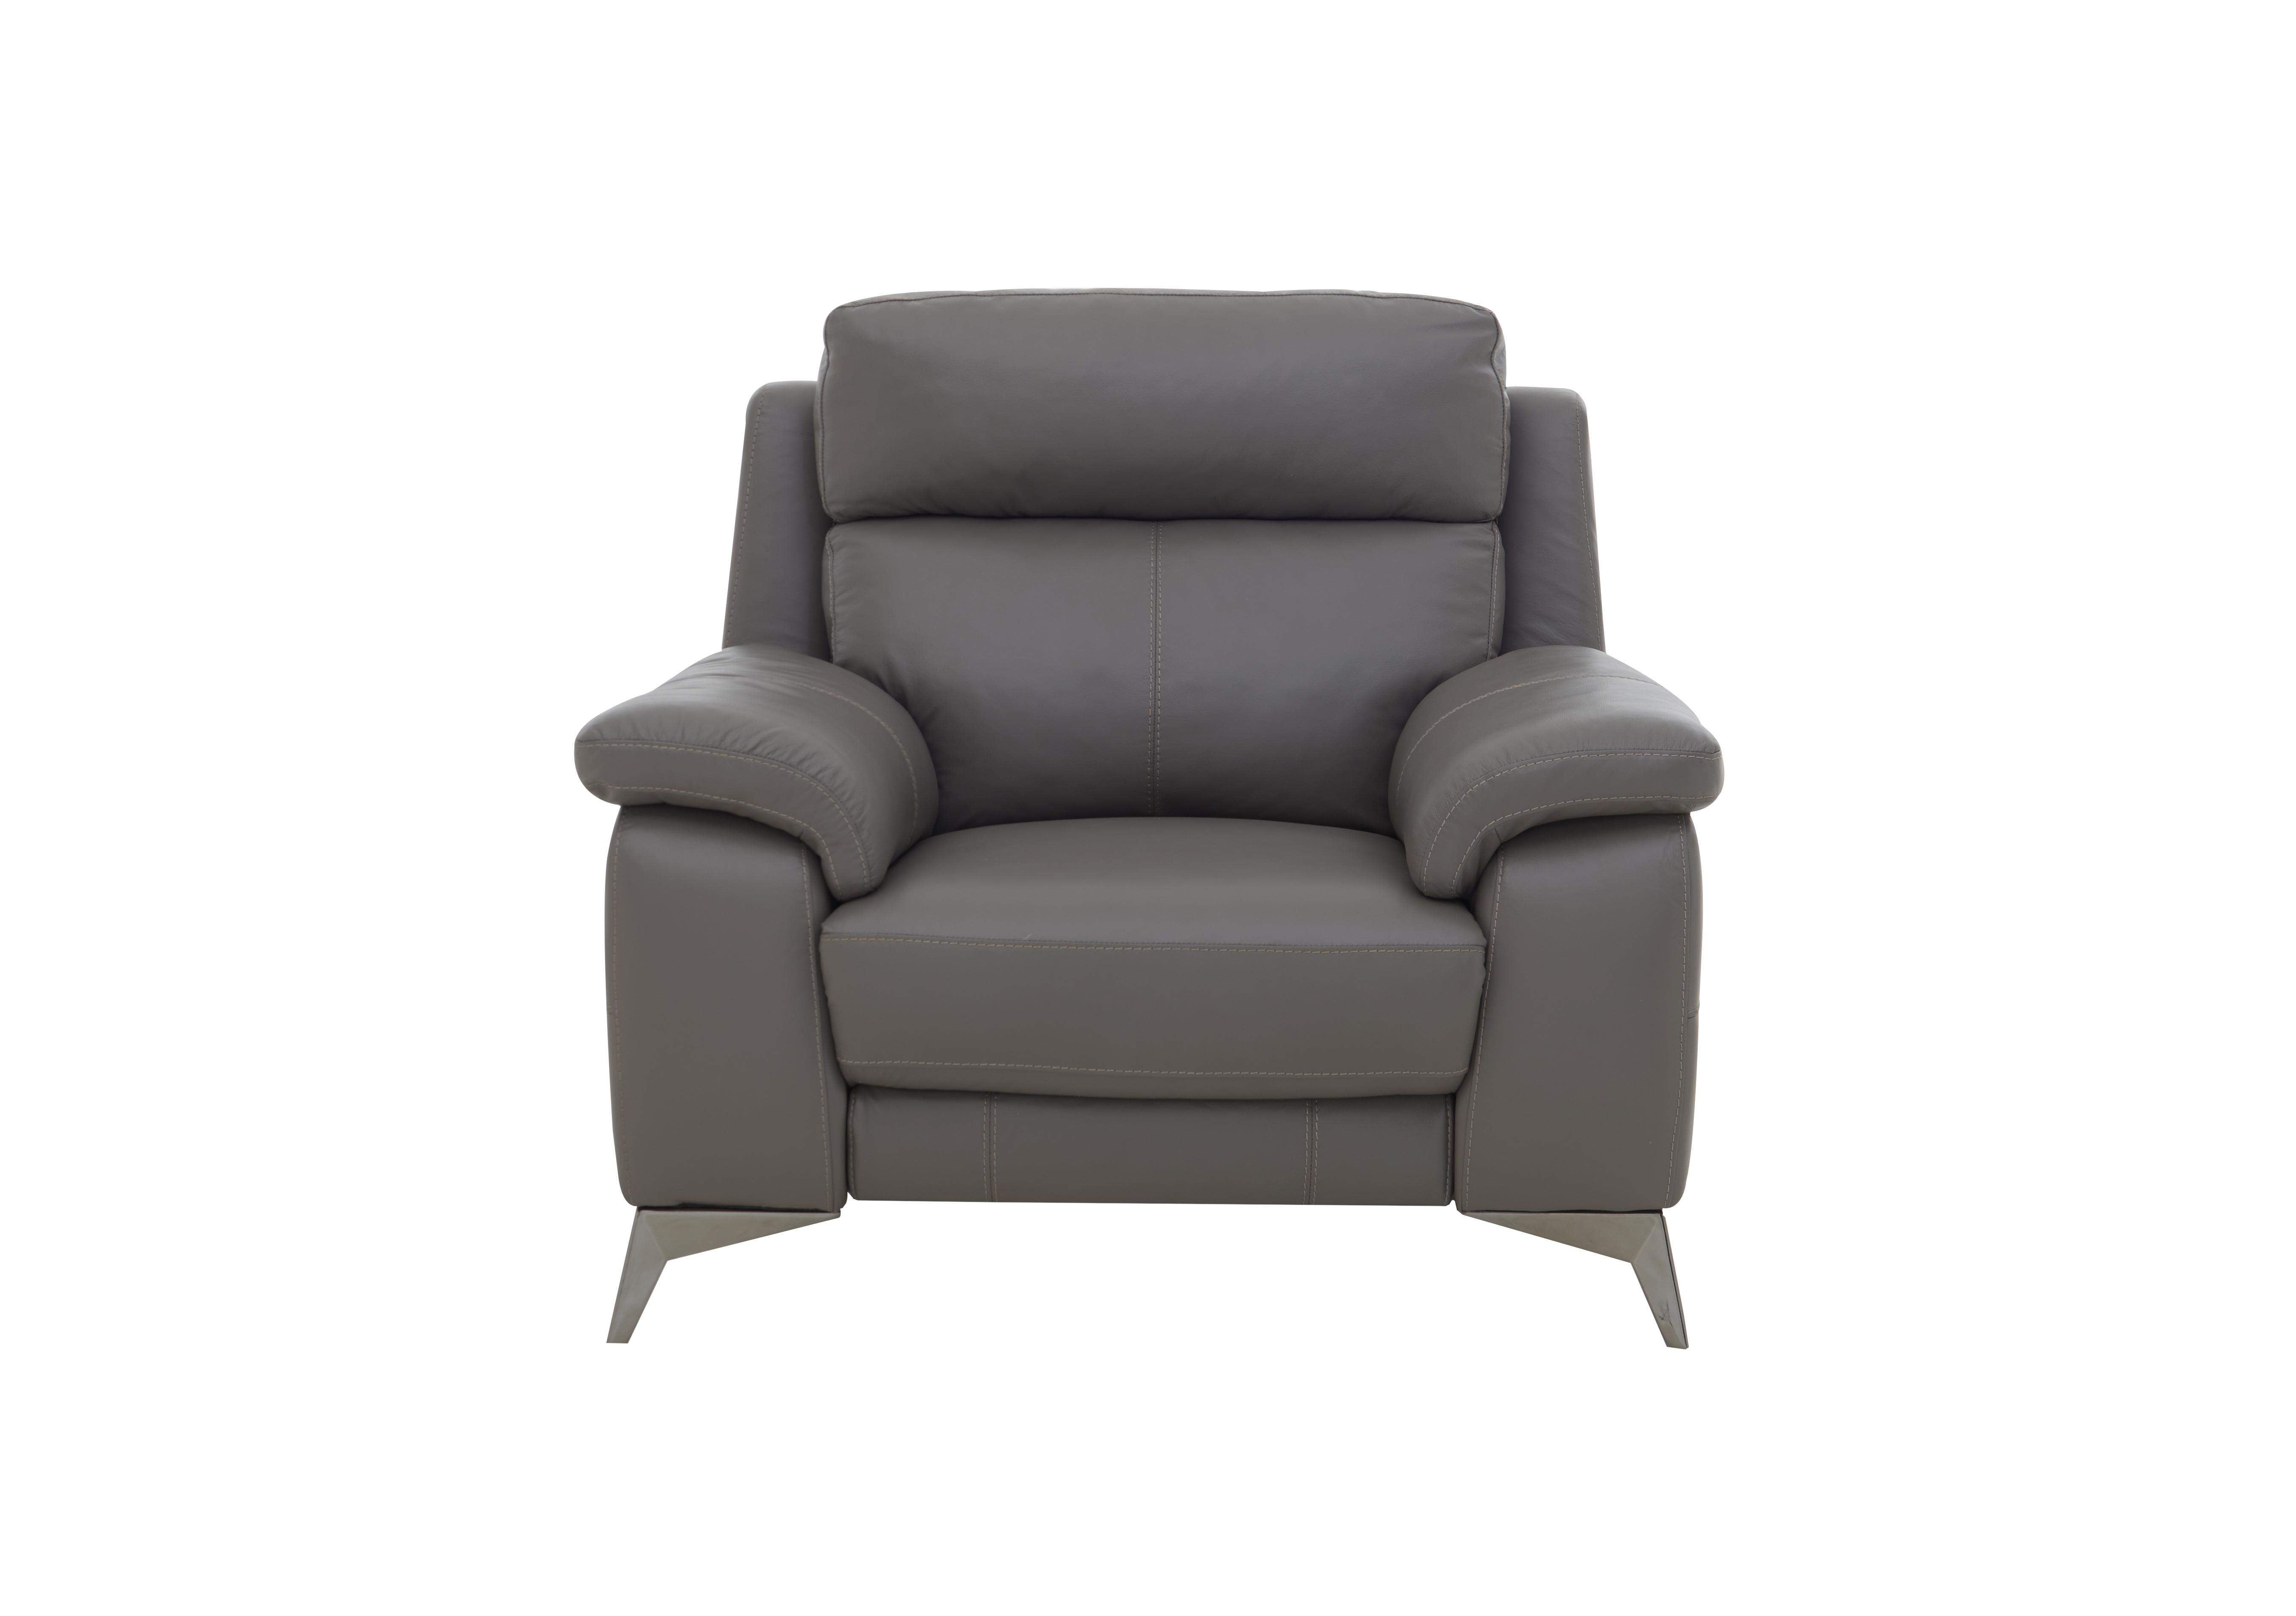 Missouri Leather Armchair in Bv-042e Elephant on Furniture Village